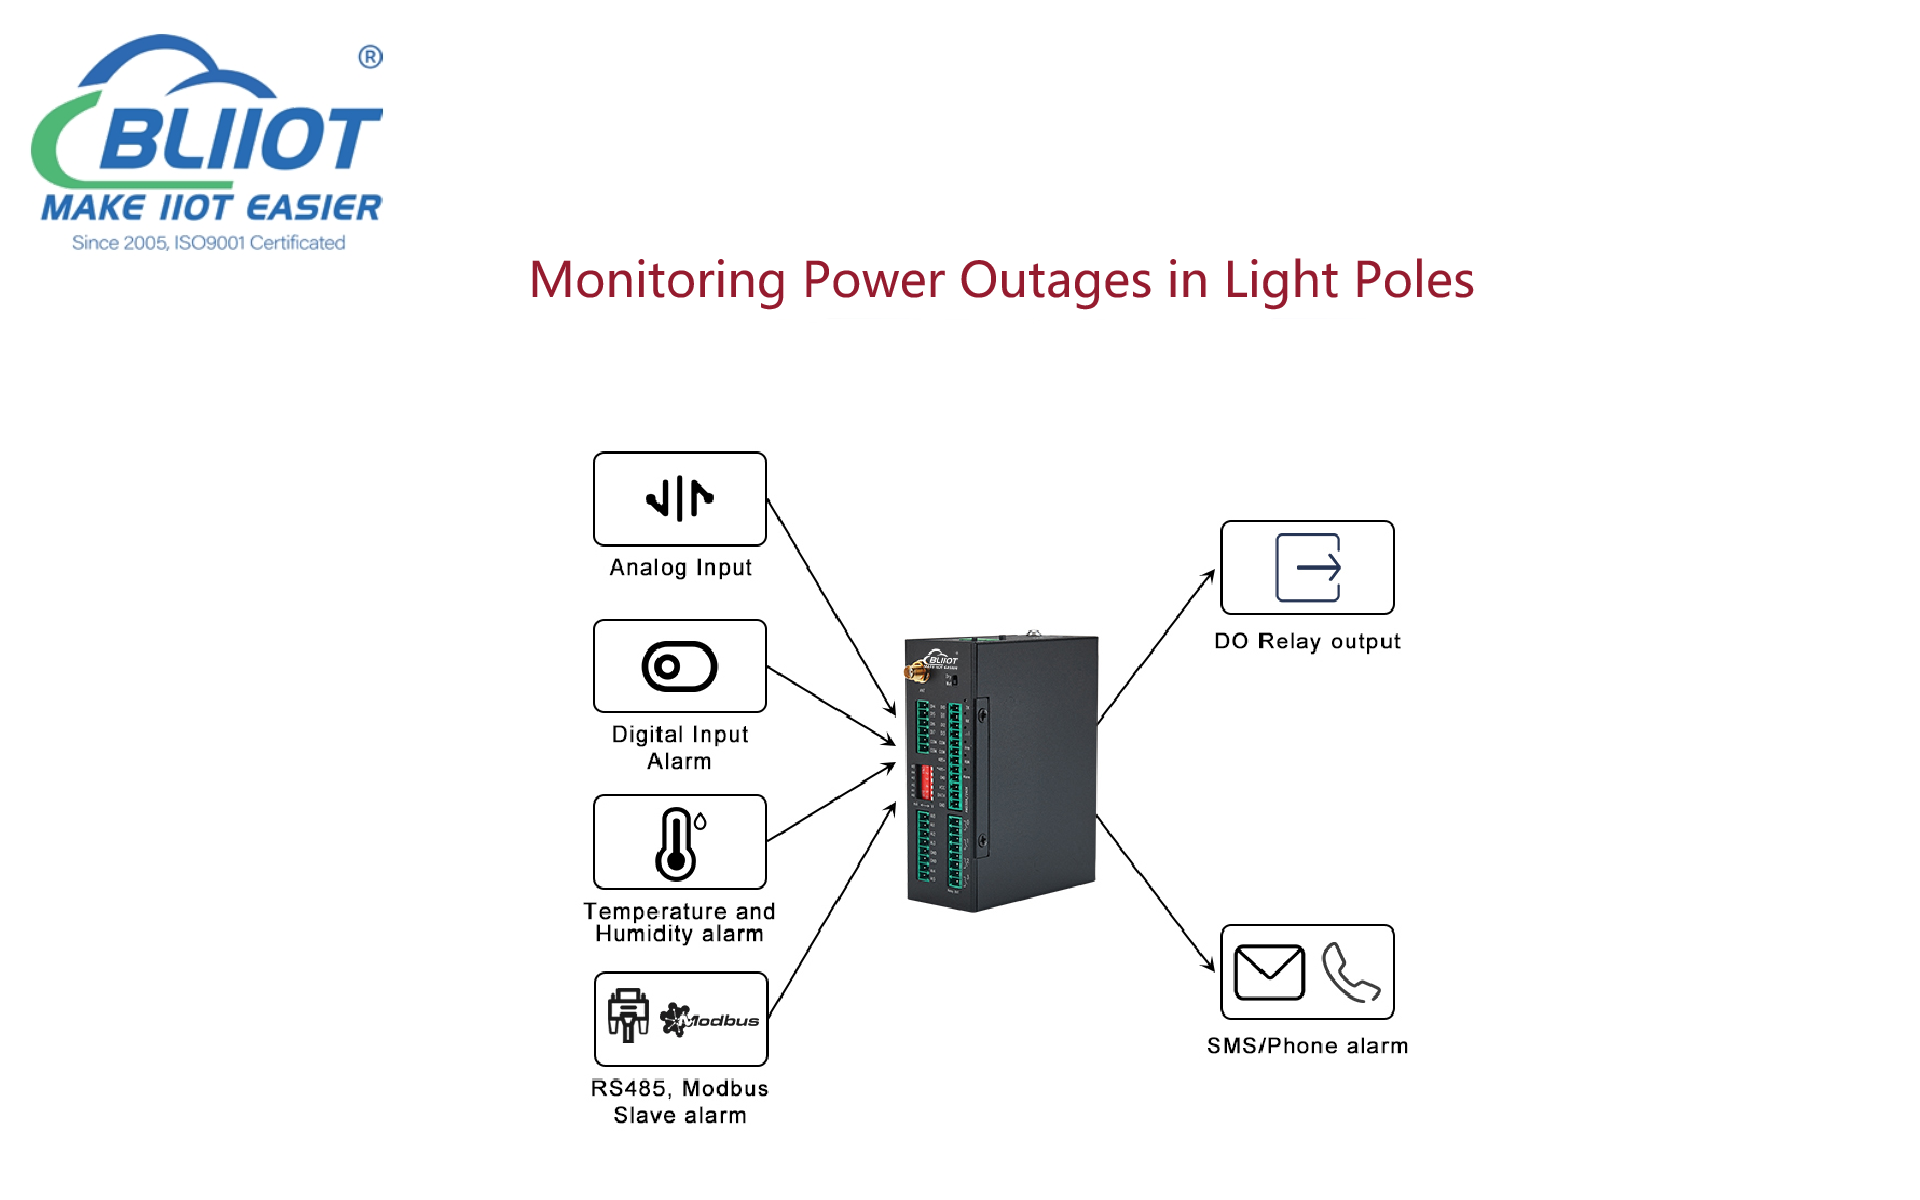 Advanced RTU Solution for Monitoring Power Outages in Light Poles